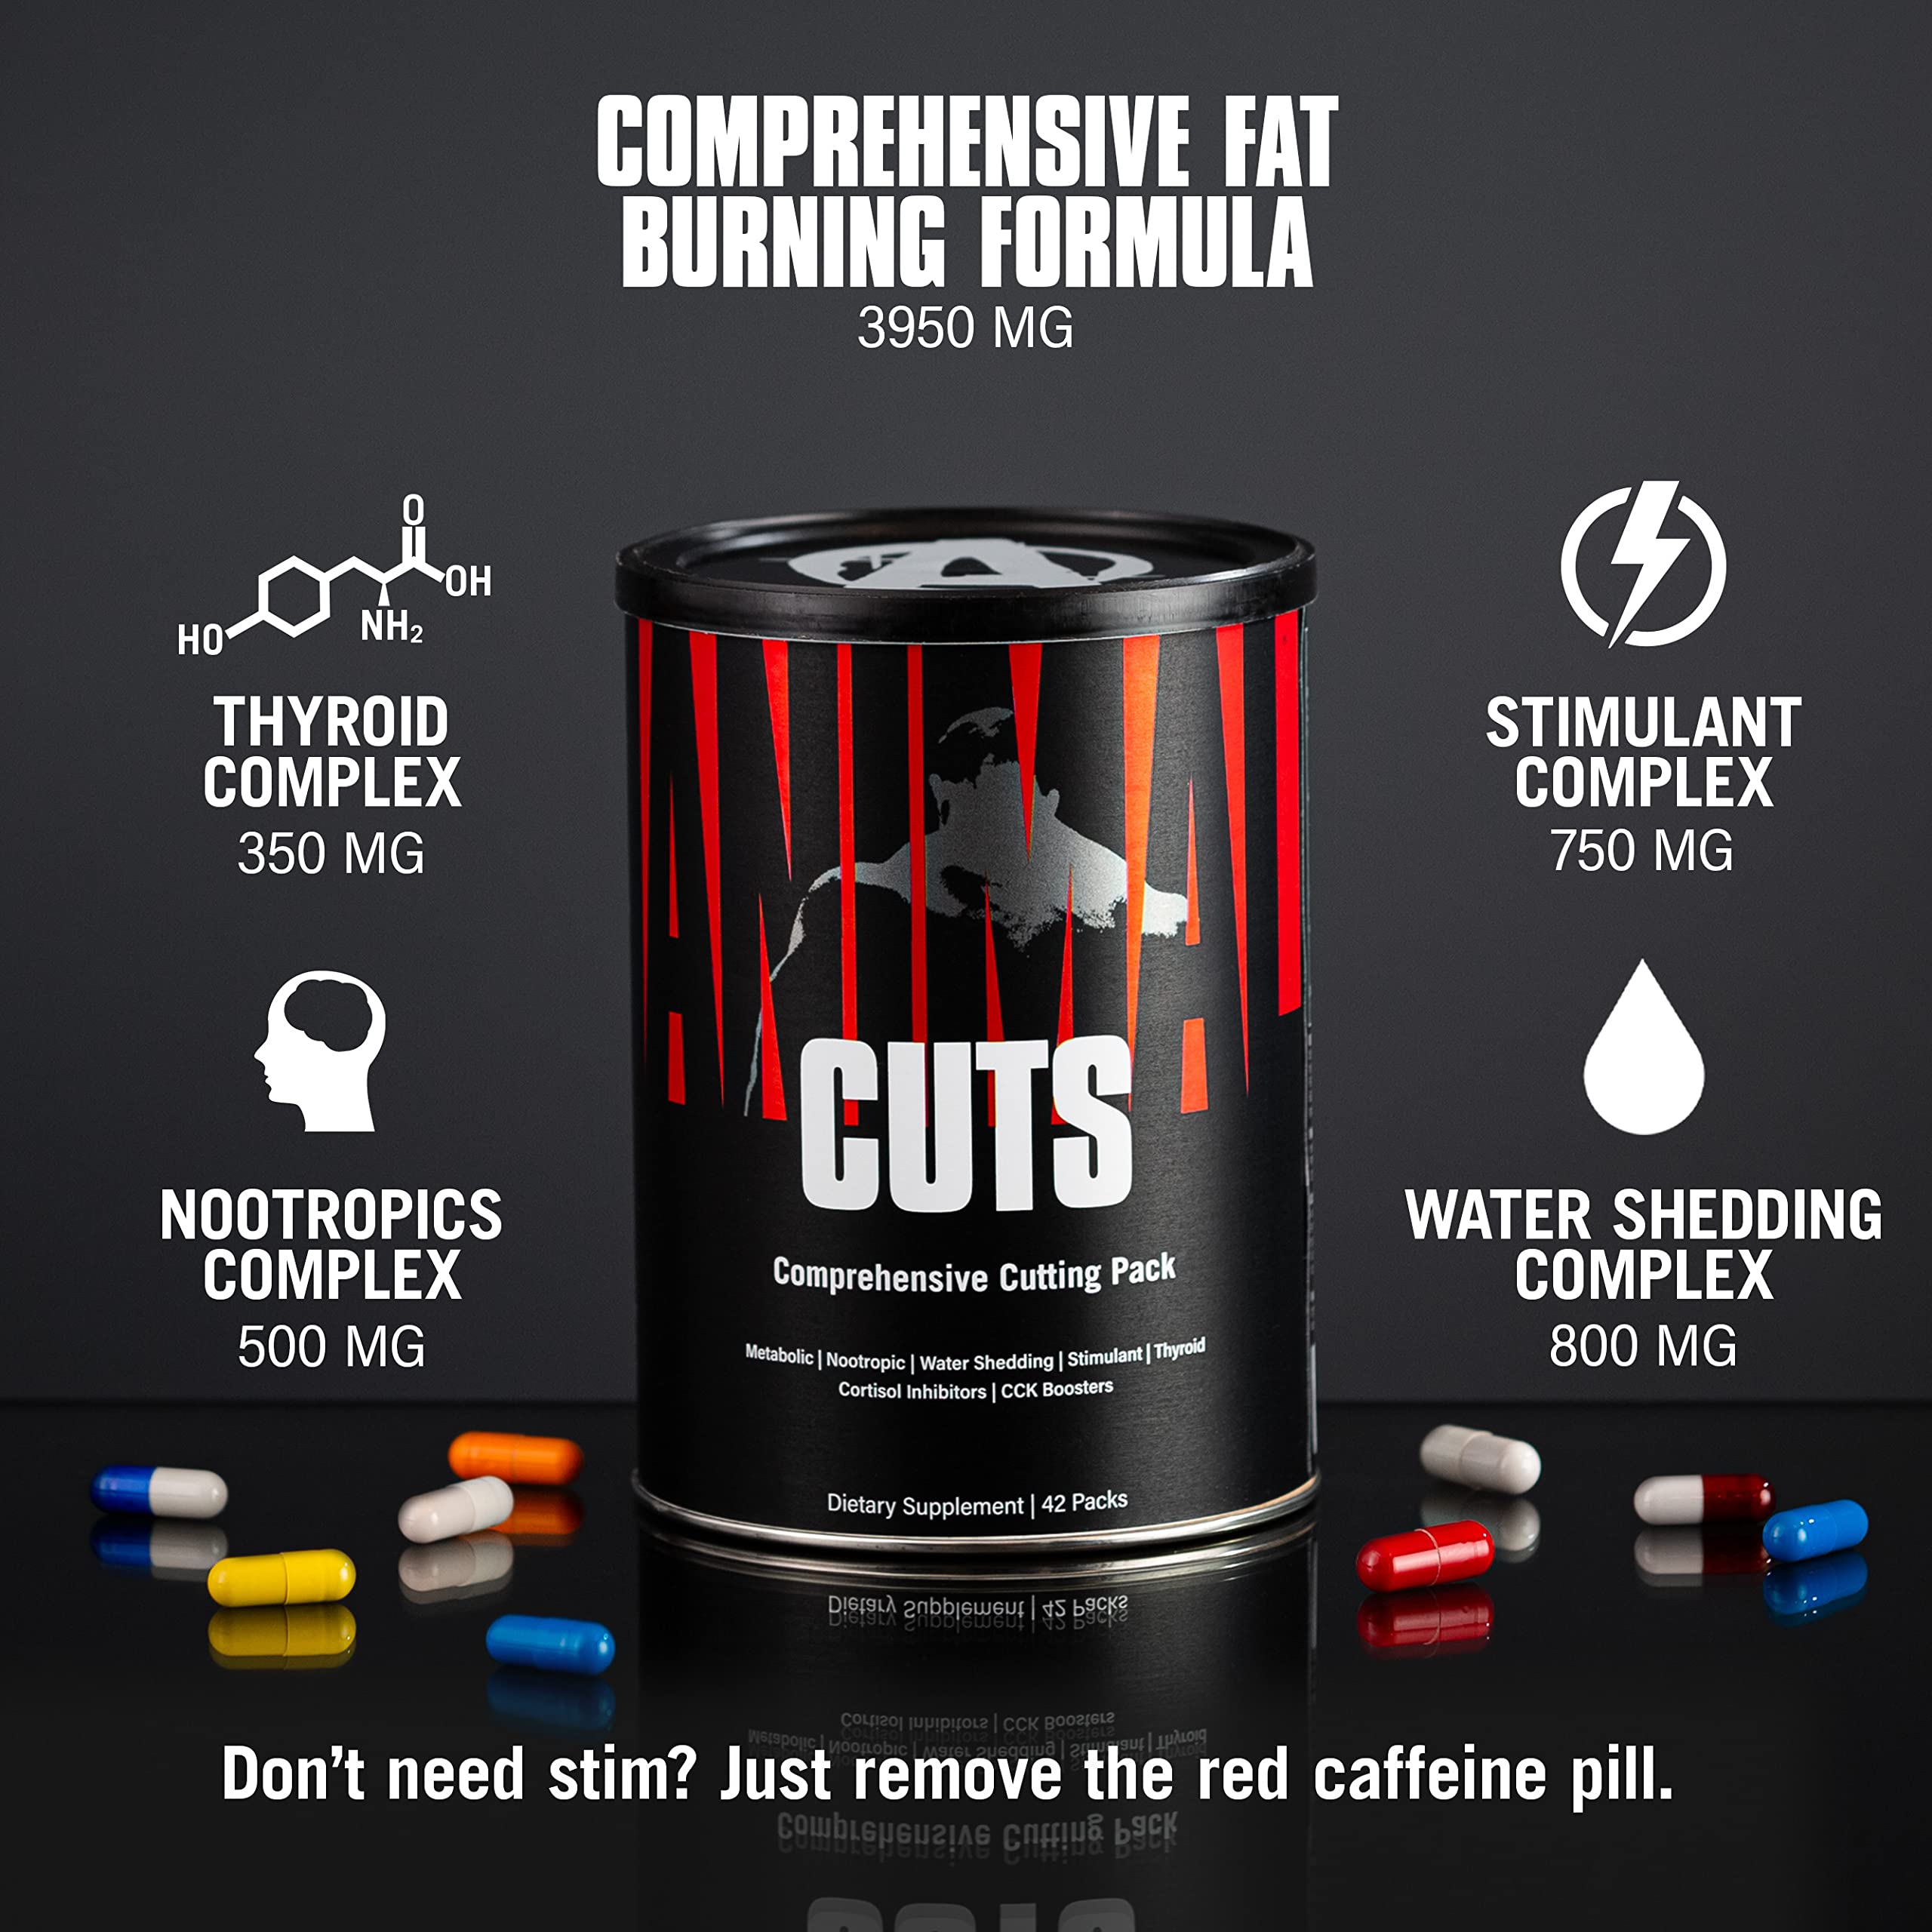 Animal Cuts Thermogenic Fat Burner - Nootropic Weight Loss Management Diet Pills for Men and Women for Focus and Brain Support with Ketones